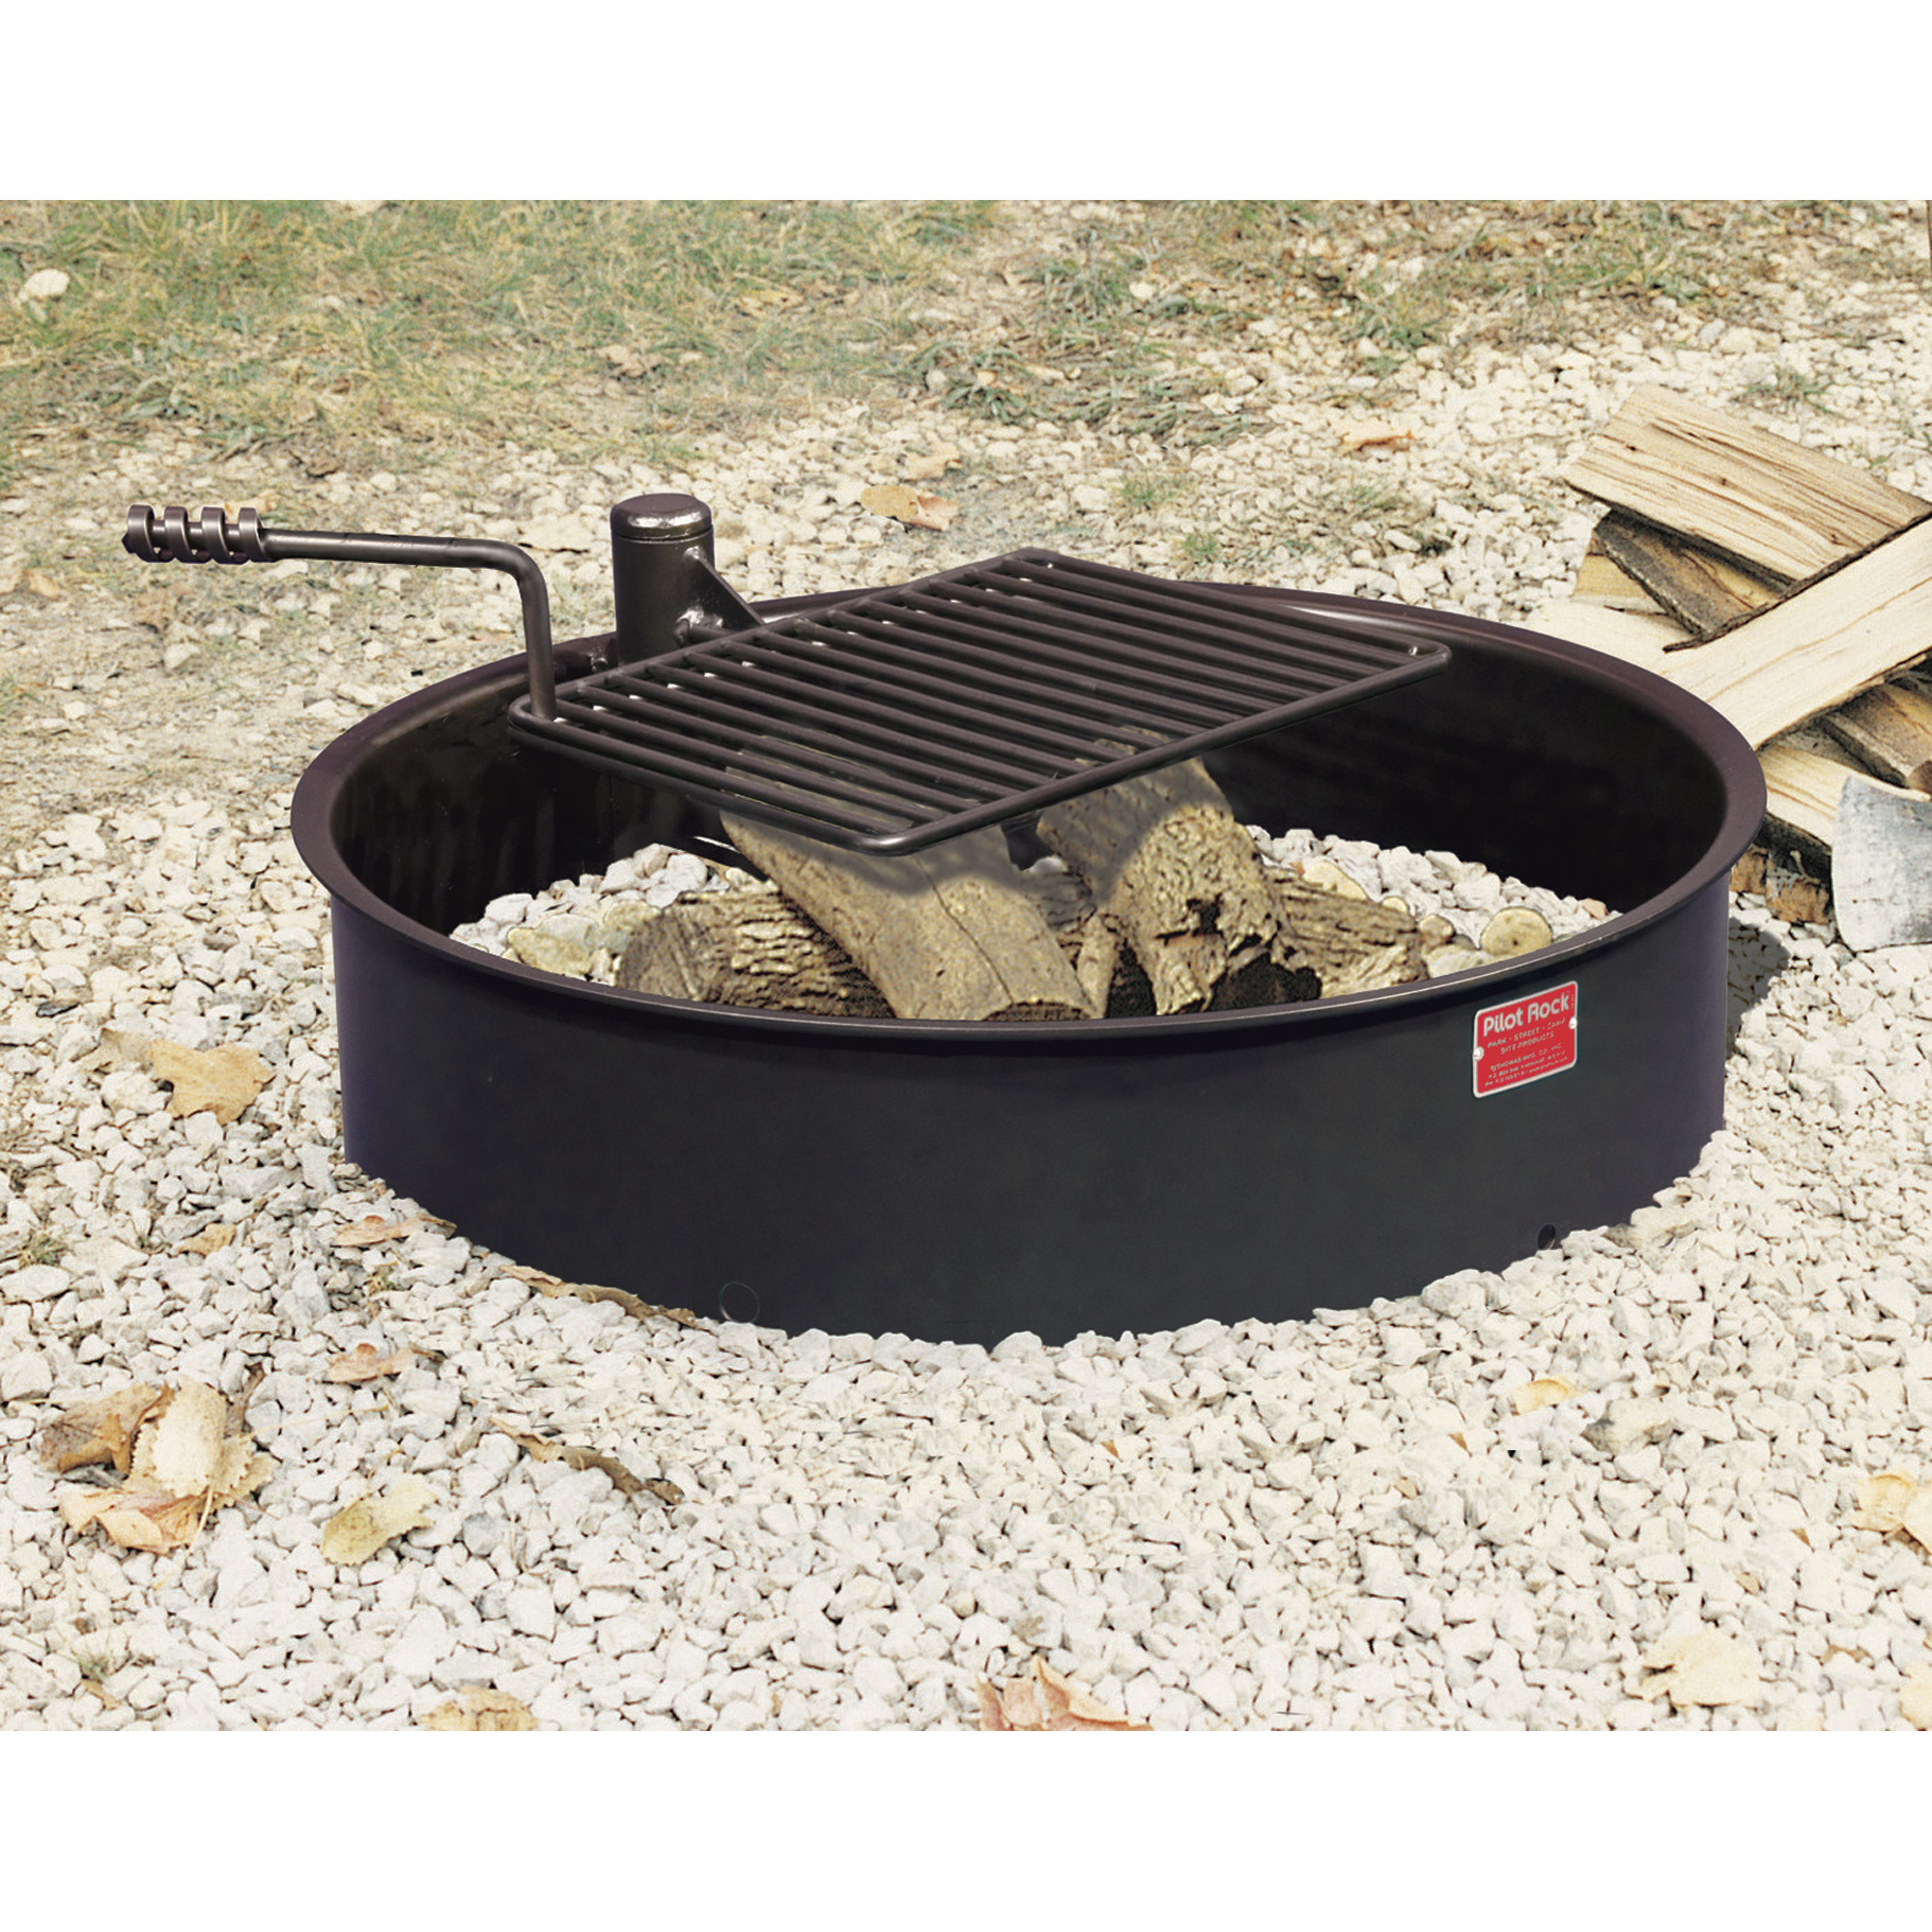 Pilot Rock Steel Fire Ring with Cooking Grate â 32Inch Diameter, Model FSW-30/7/TB